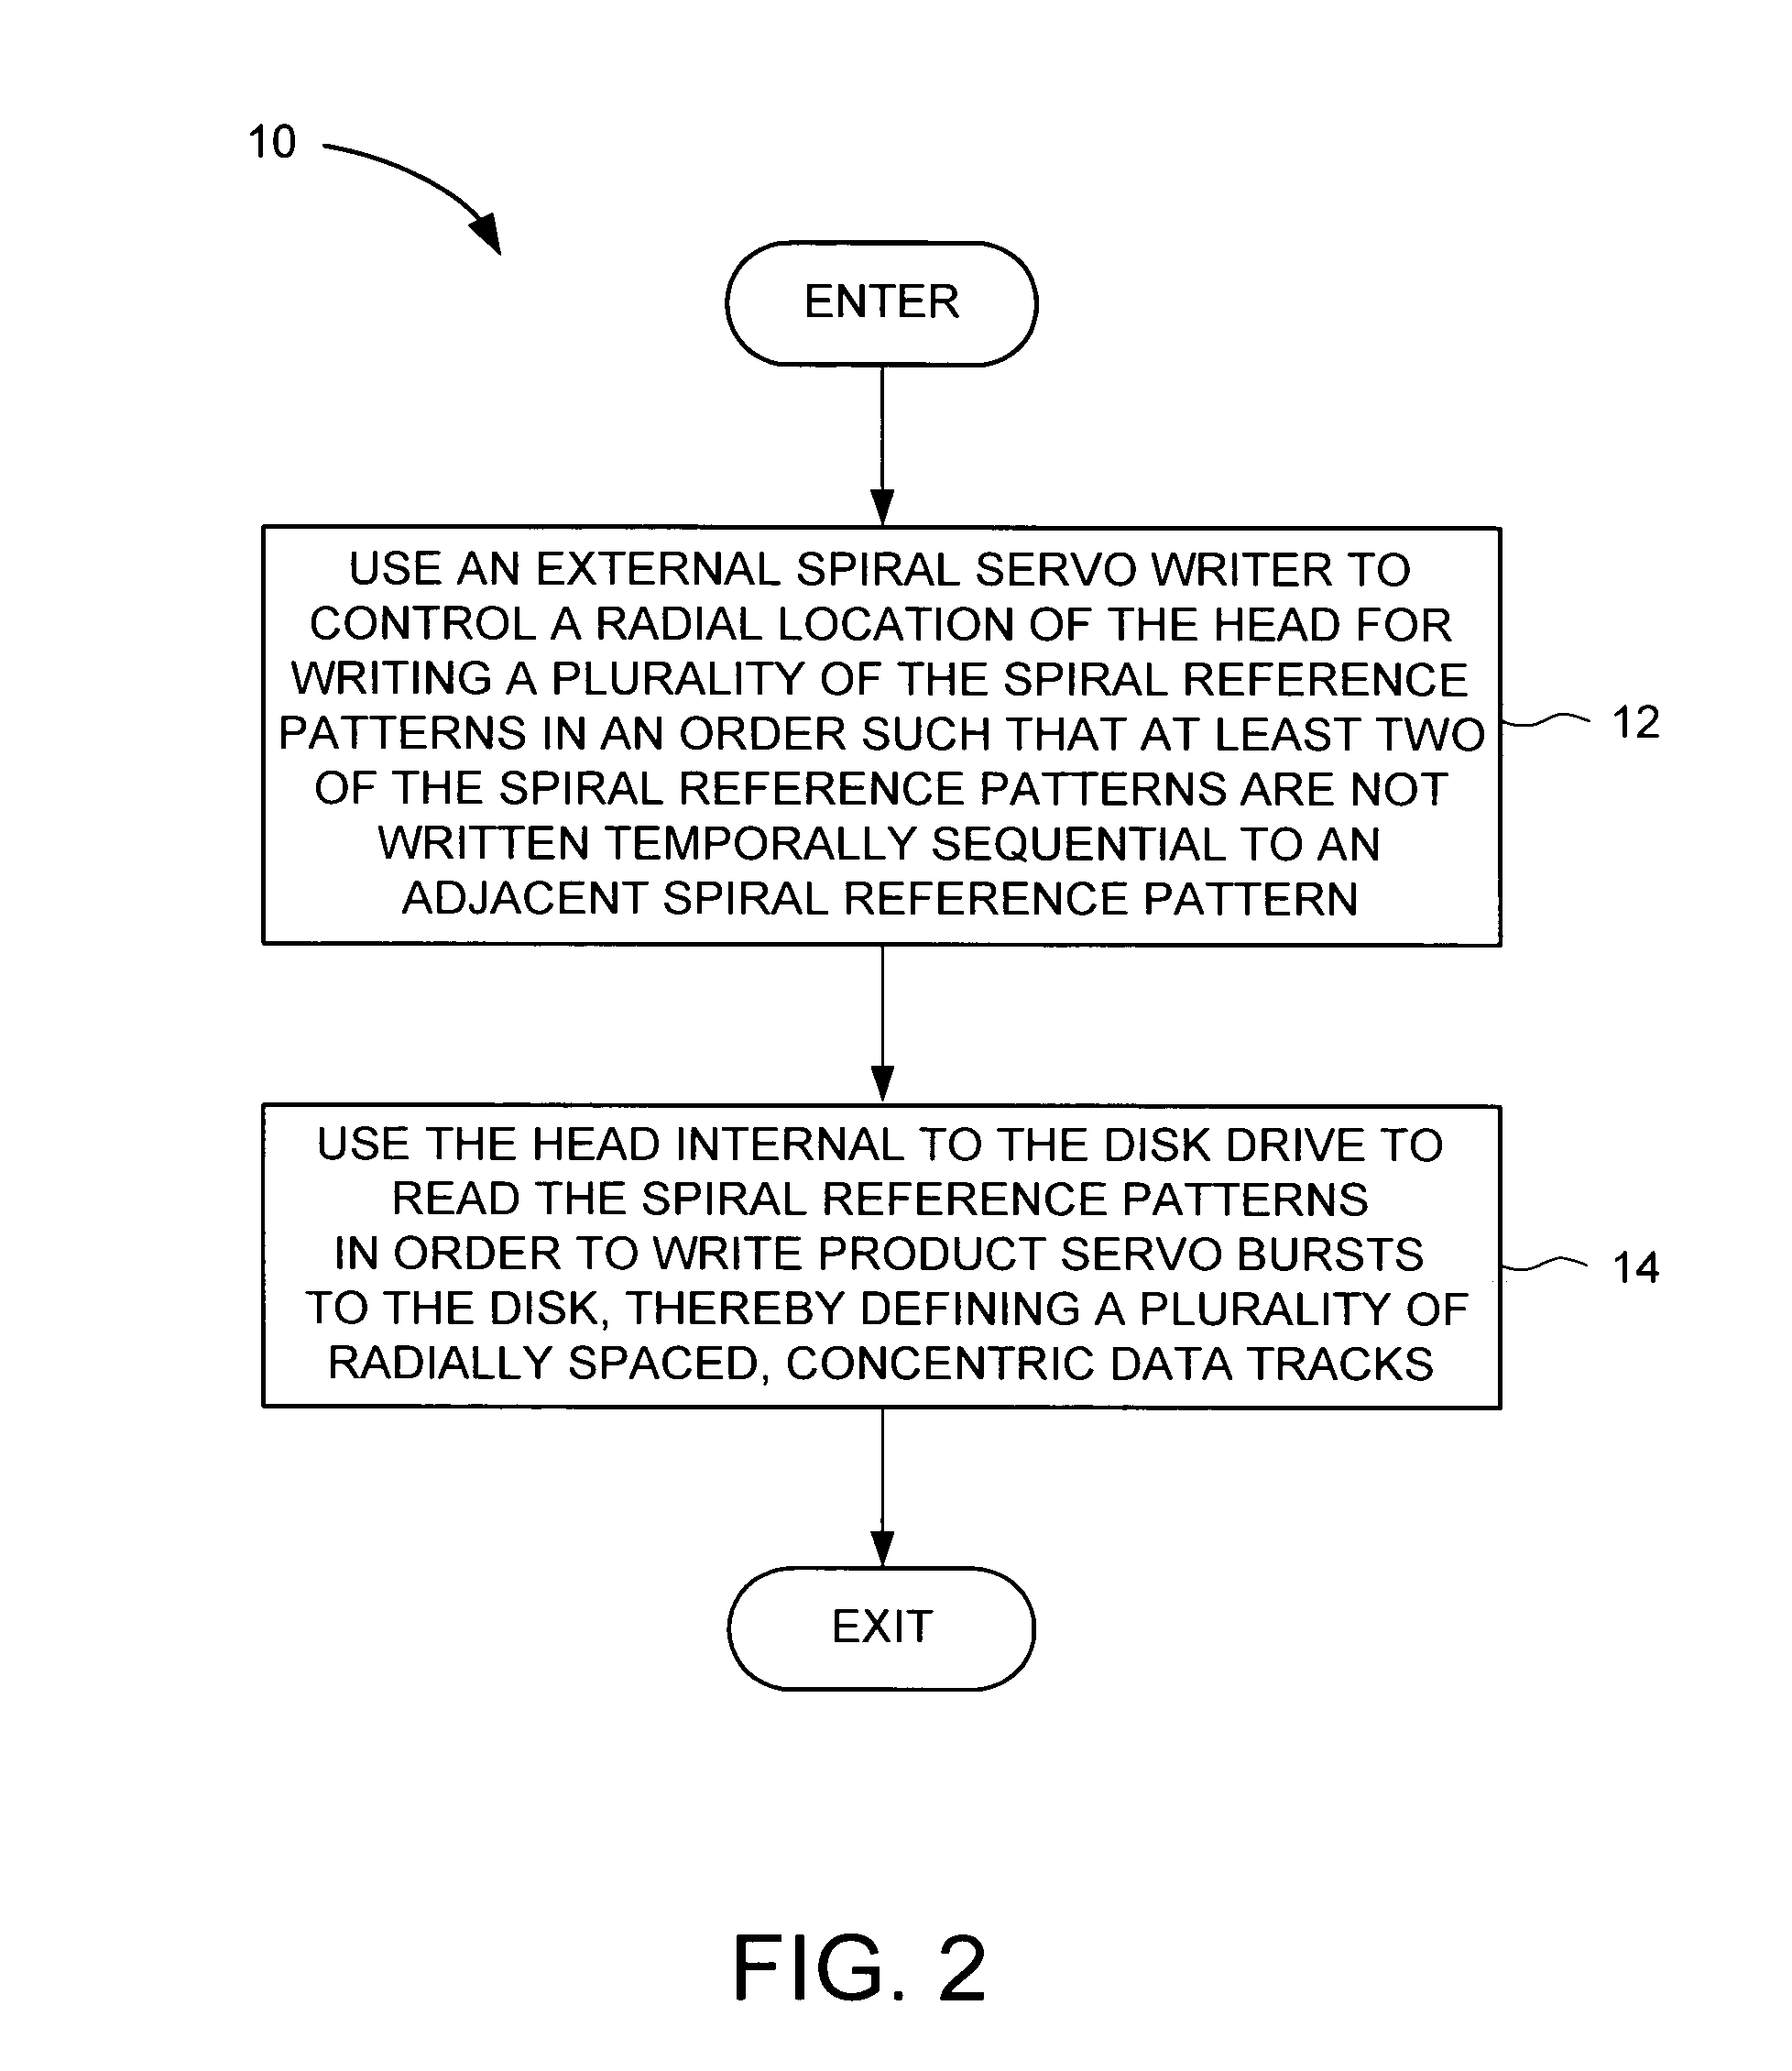 Method for nonsequentially writing reference spiral servo patterns to a disk to compensate for disk expansion